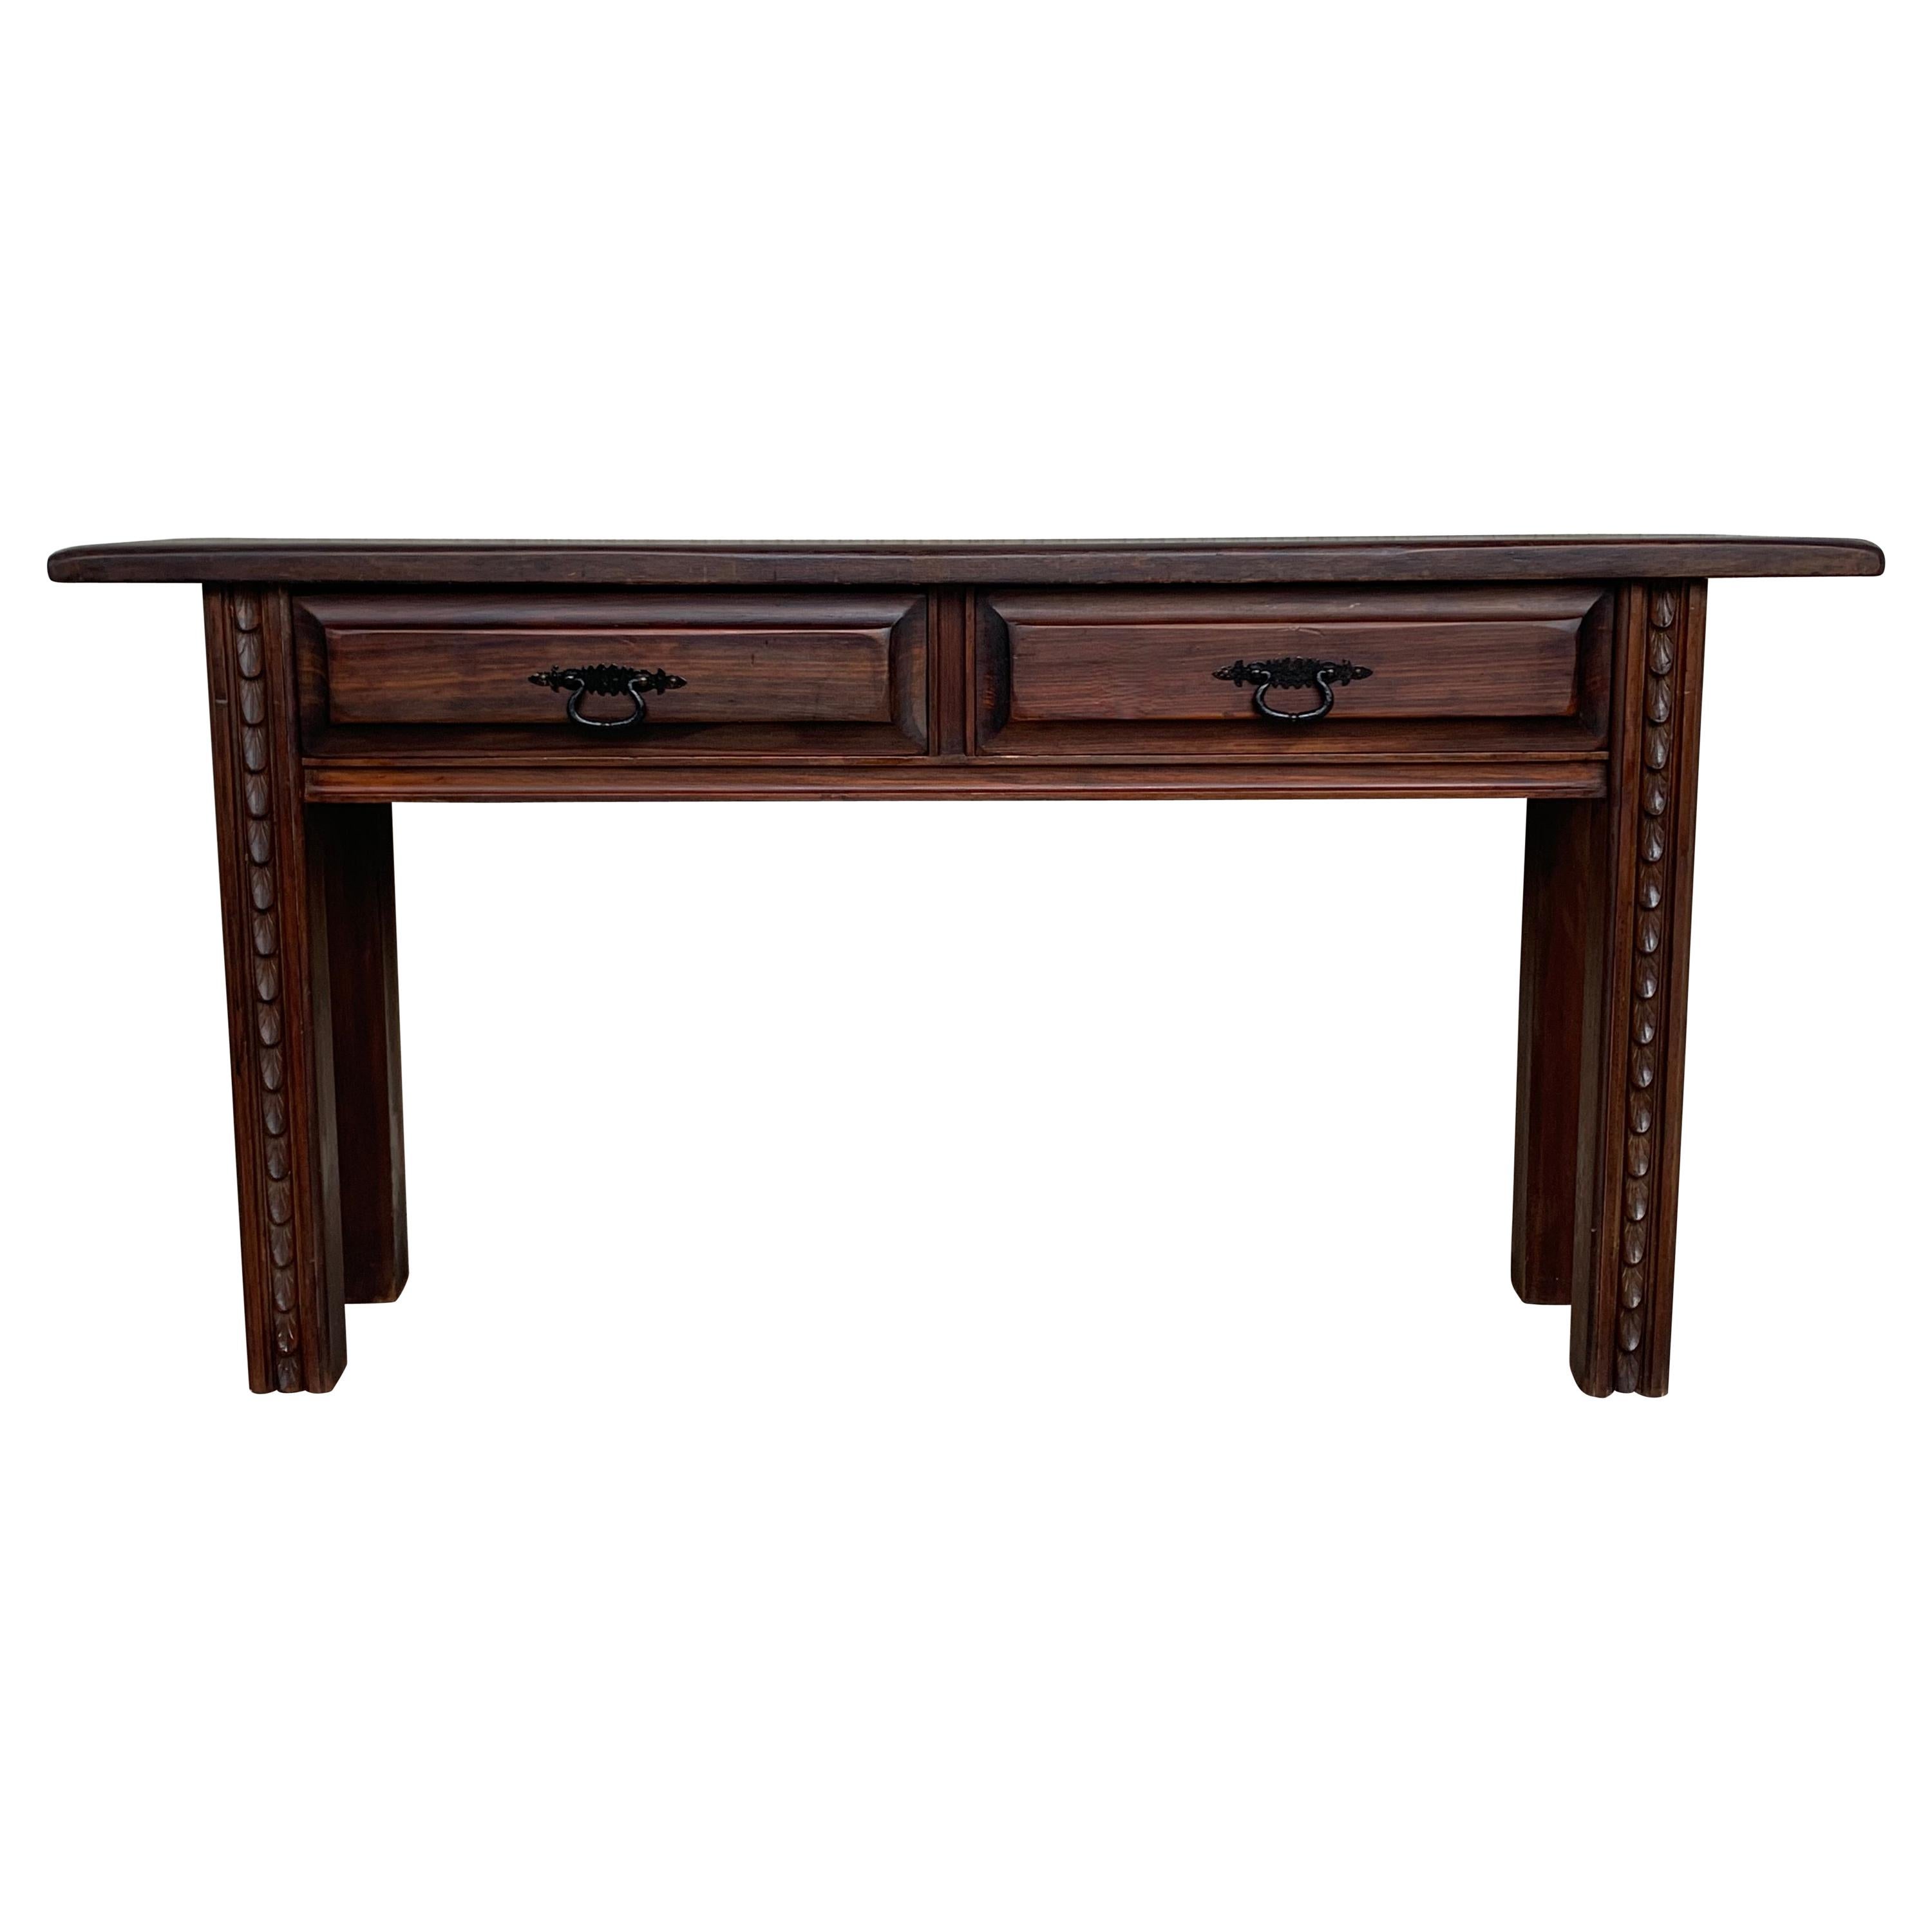 Late 19th Century Spanish Console Table with Drawers and Carved Legs